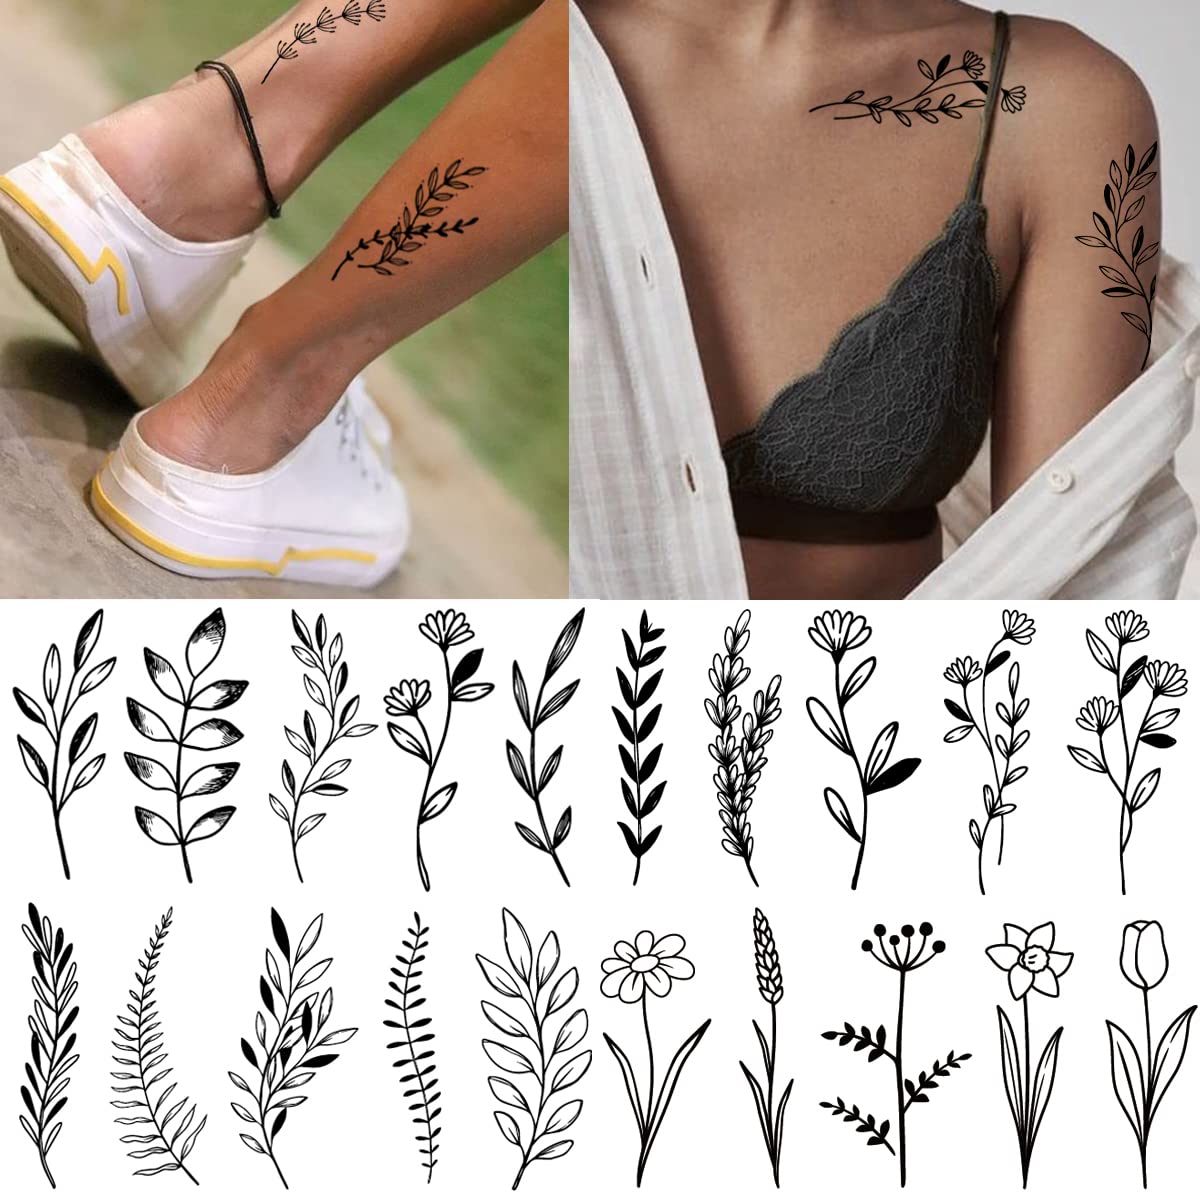 Tazimi 12 Sheets Black Flower Temporary Tattoos for Women Girls,Black Small Wild Floral Bouquet Tiny Branch Floral Wild Plants Sketch Tattoo Stickers for Women Body Art Arm